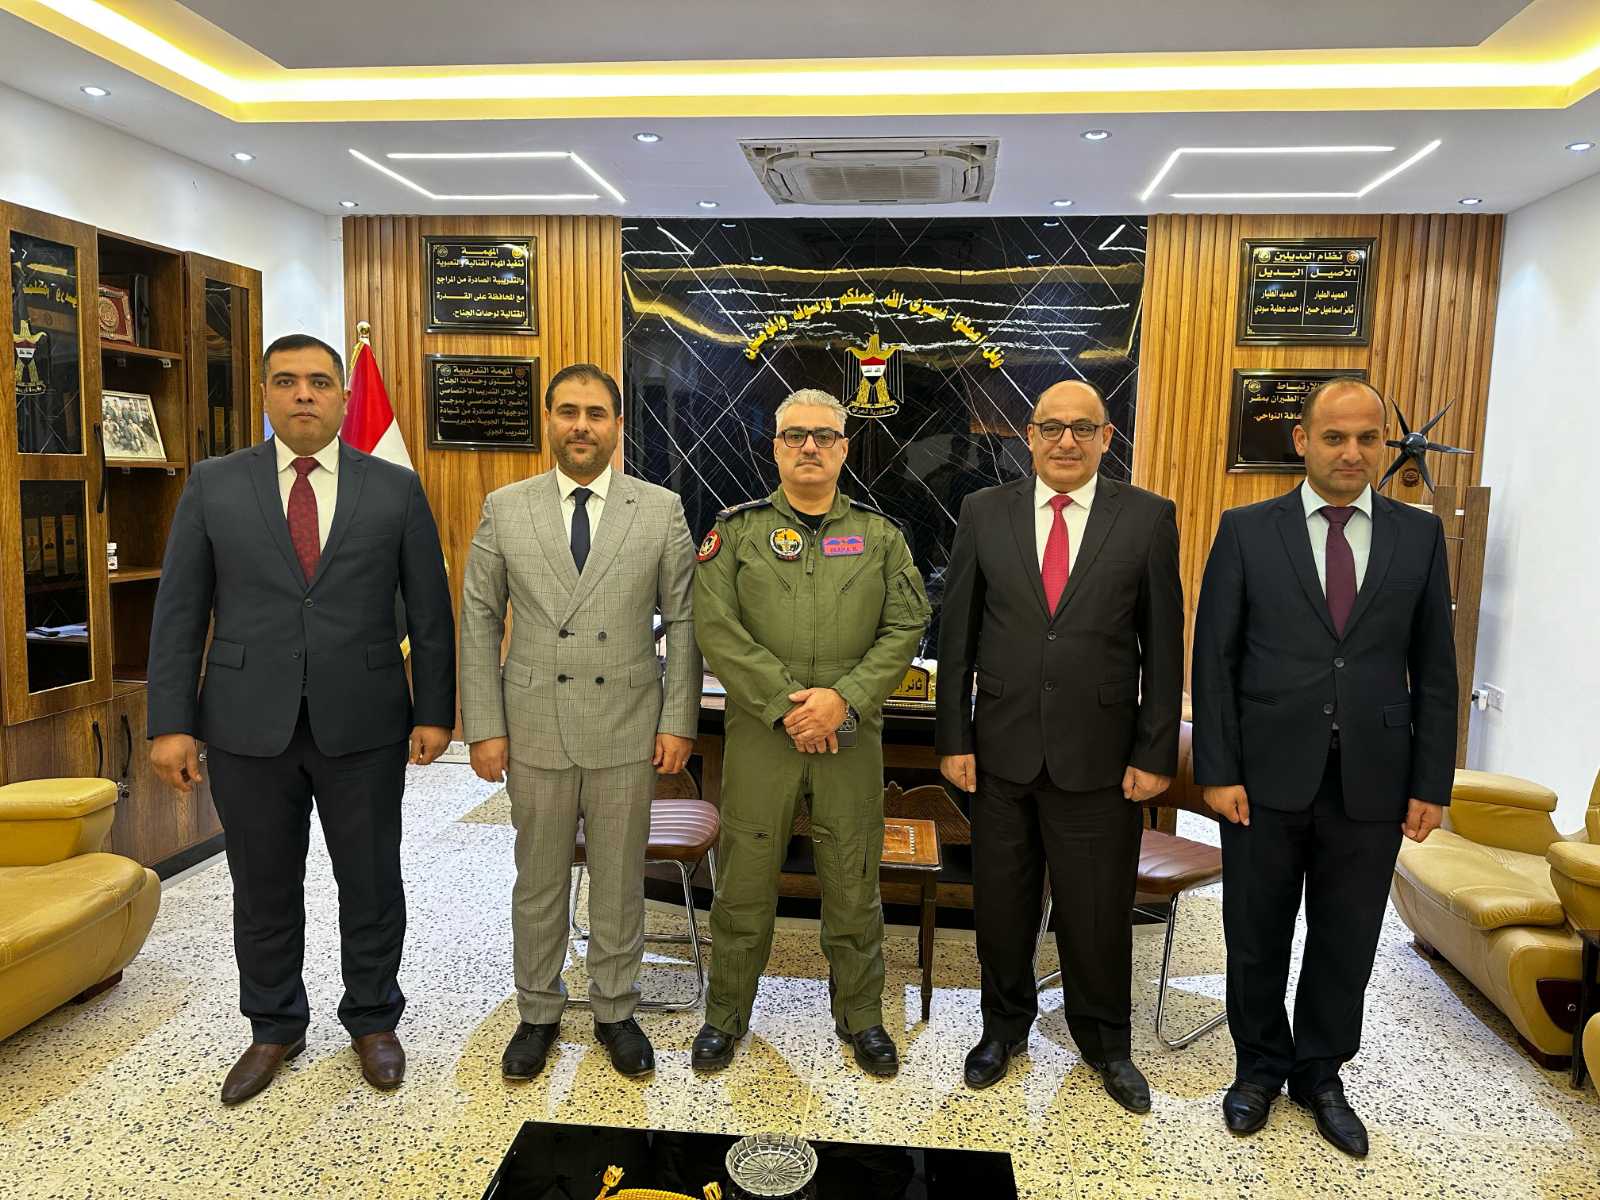 A team from the center visited the Iraqi Air Force Command